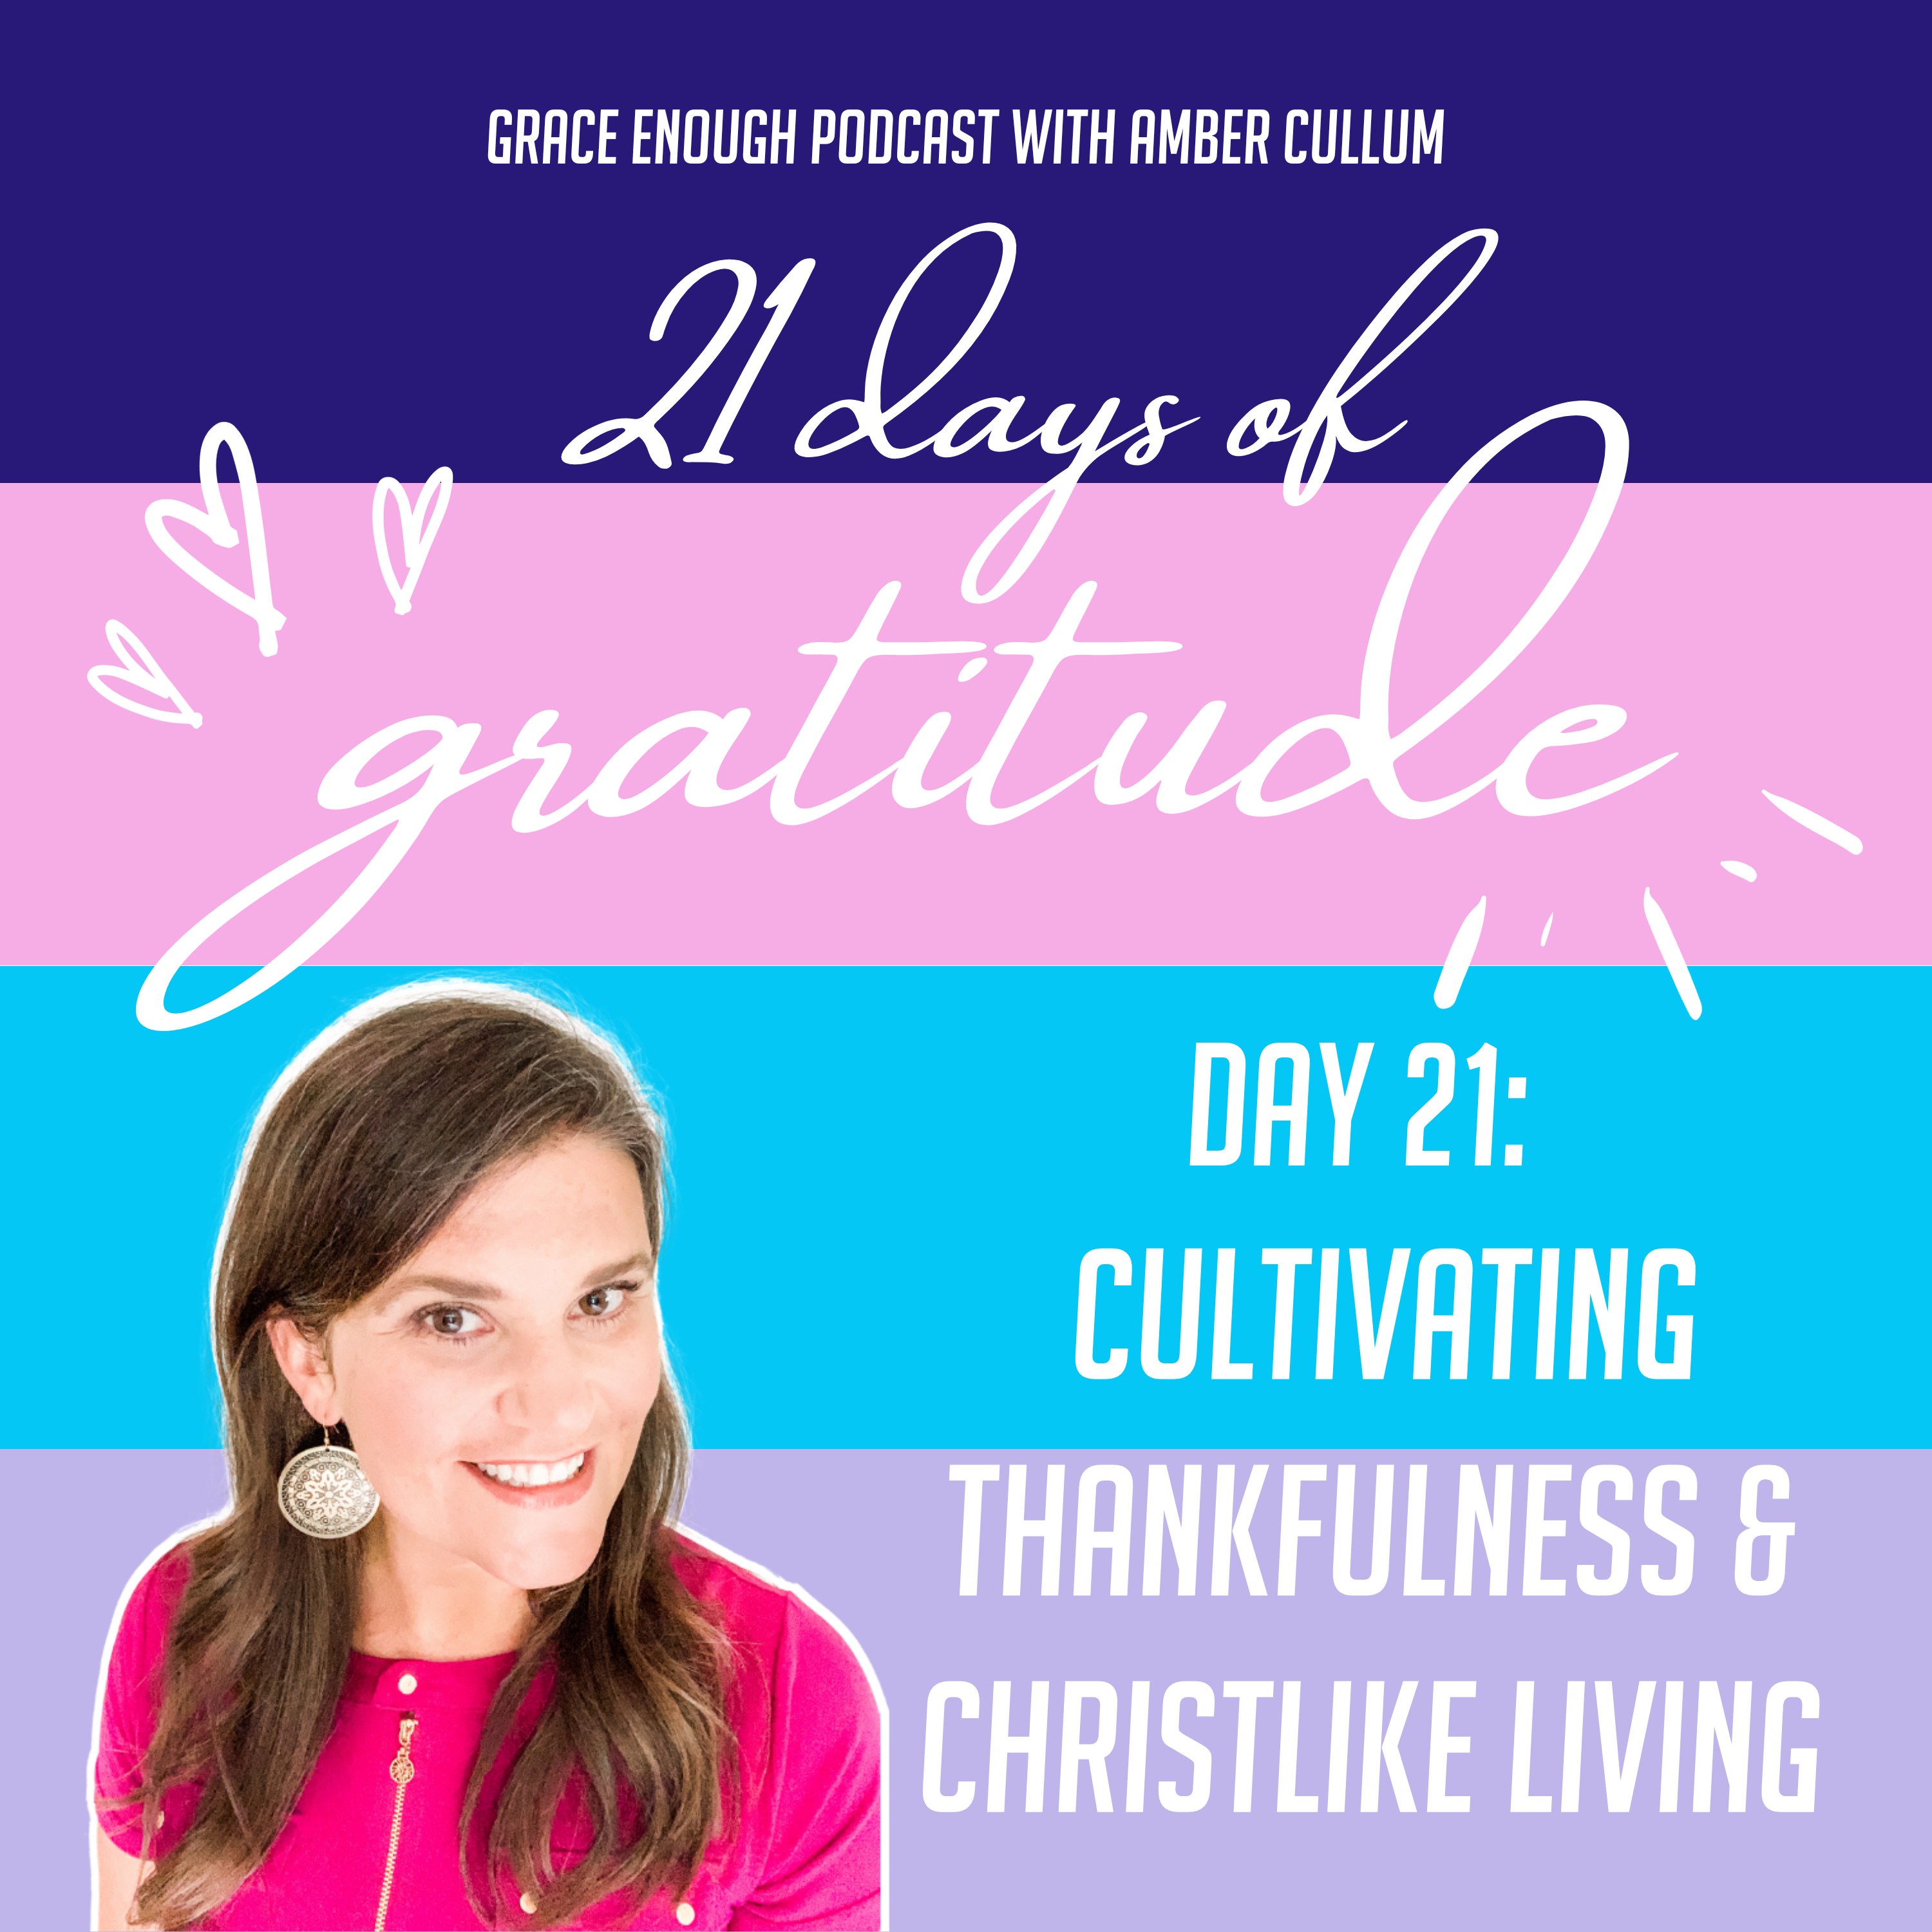 21 Days of Gratitude: Day 21, Cultivating Thankfulness and Christlike Living